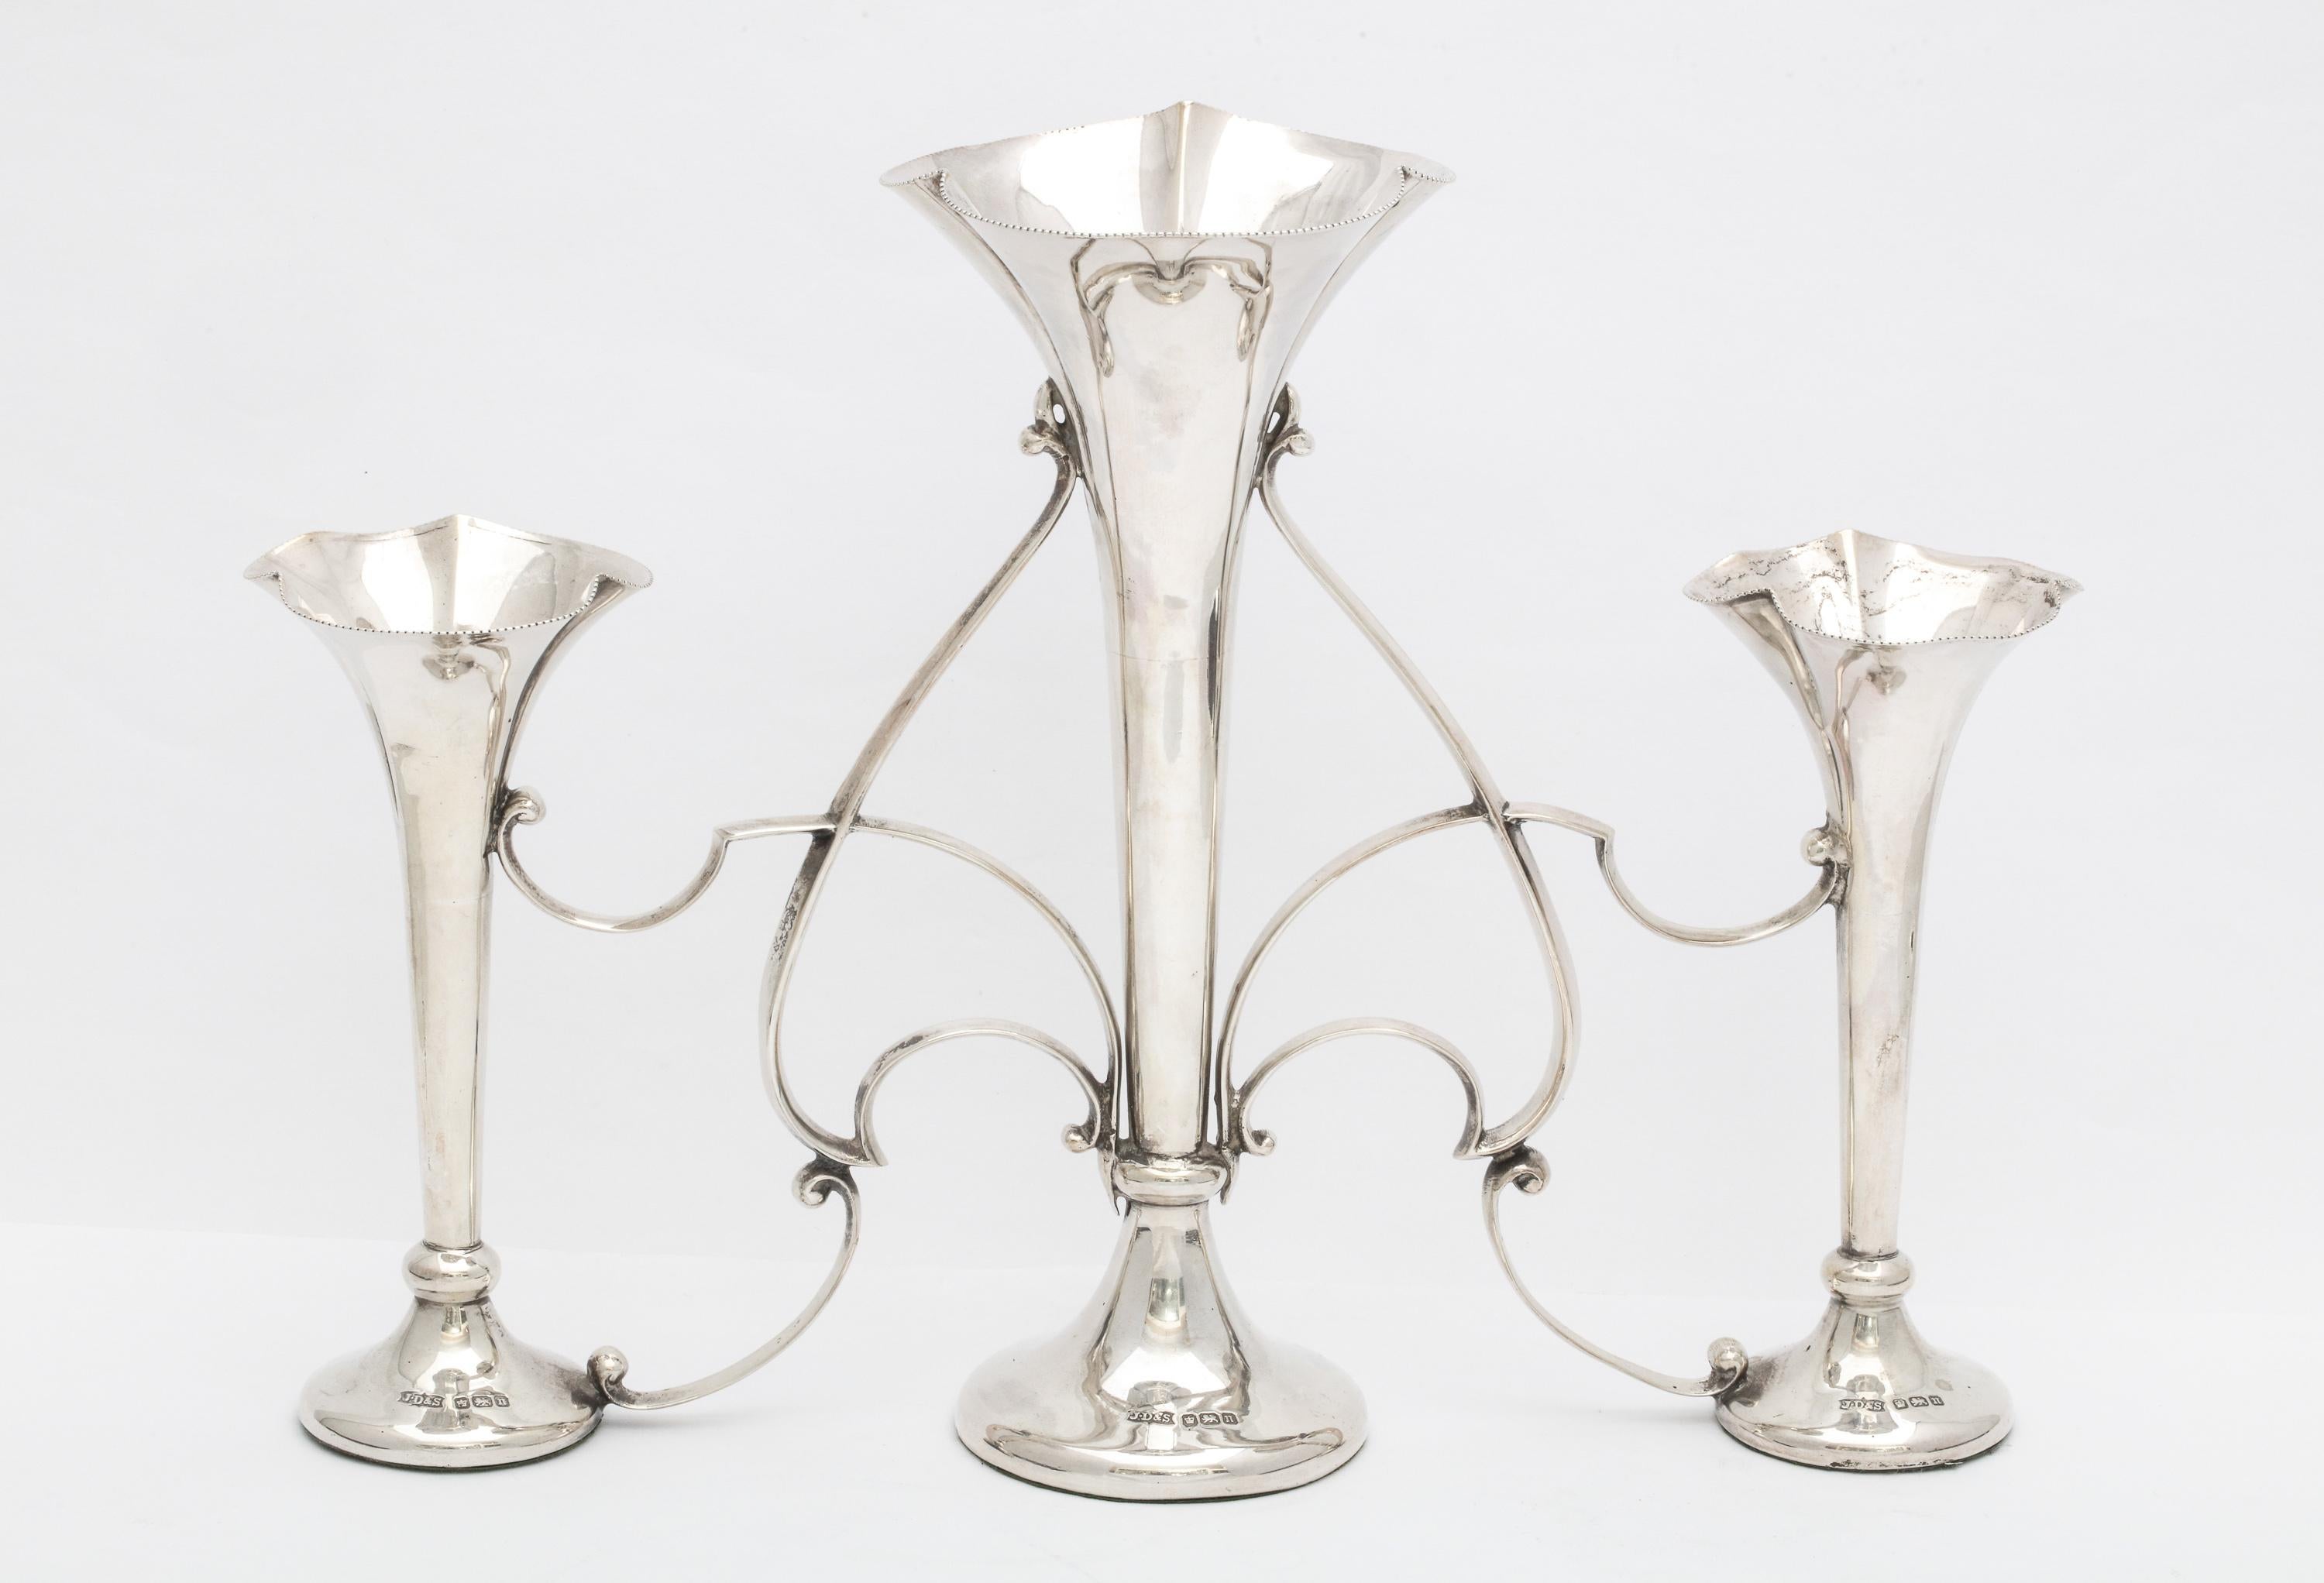 Art Nouveau, sterling silver three-vase epergne/centerpiece, Sheffield, England, 1905, James Dixon and Sons - makers. Measures over 6 3/4 inches high (at highest point) x 9 1/2 inches wide (at widest point) x 3 inches deep (at deepest point).